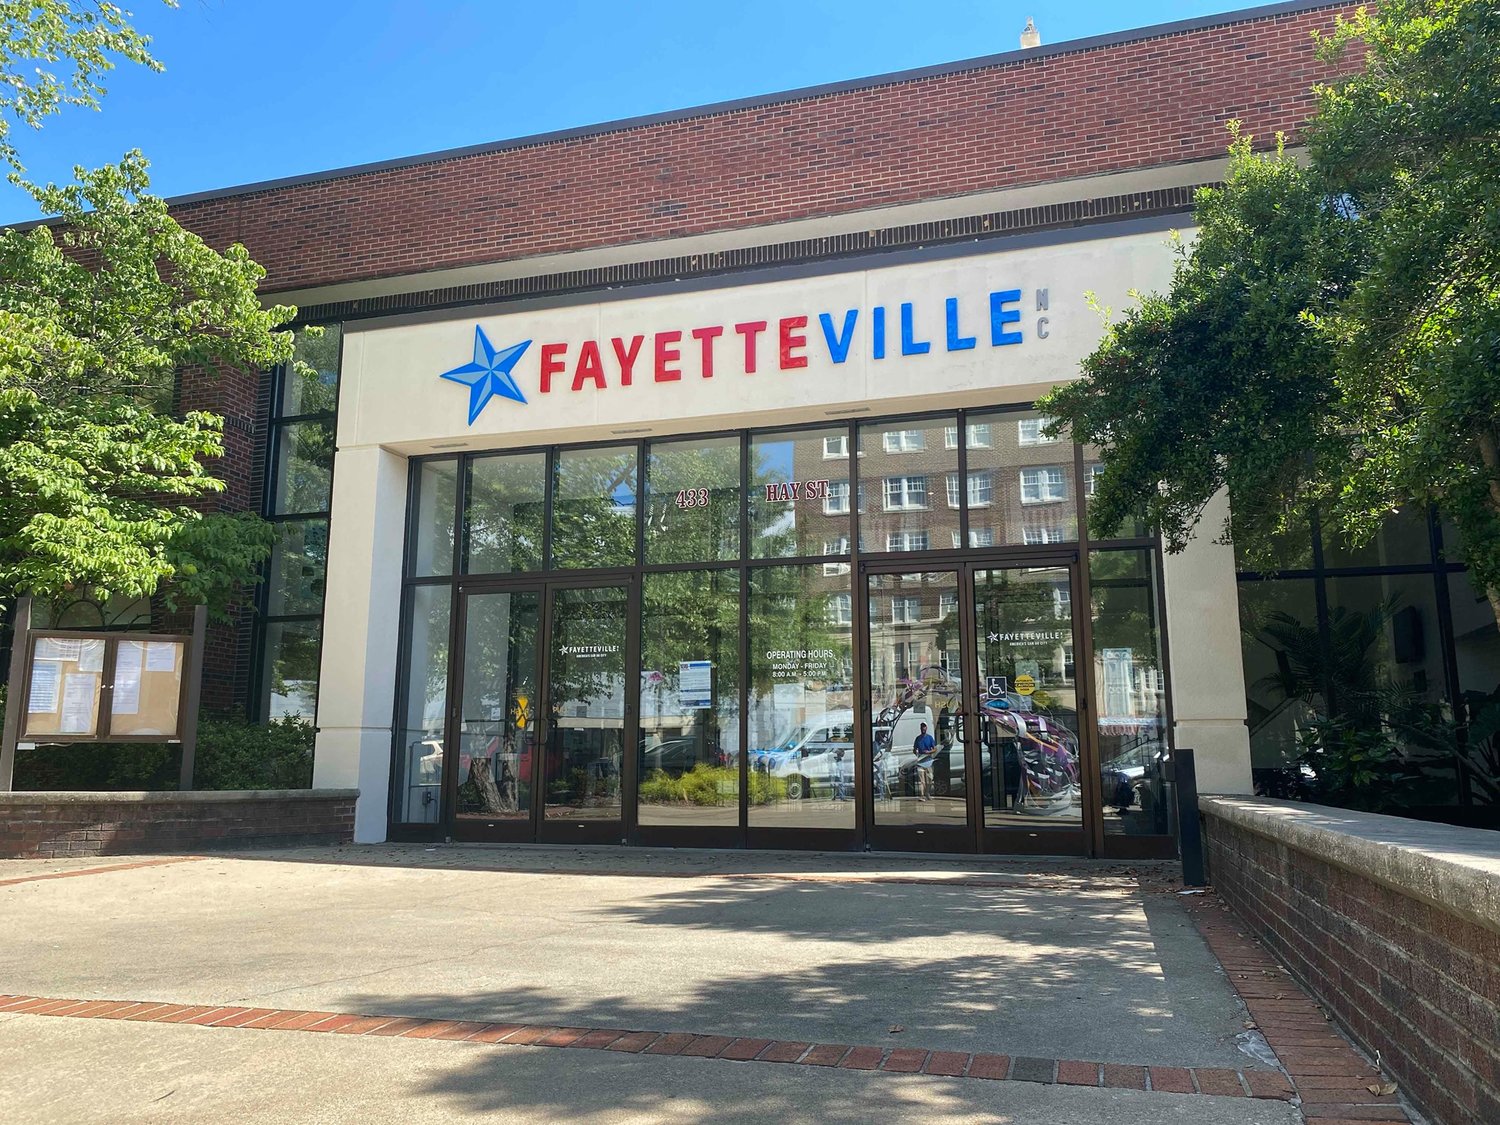 The Fayetteville City Council voted 5-4 Monday night not to pursue an investigation into allegations made by former Councilwoman Tisha Waddell against the mayor and others.